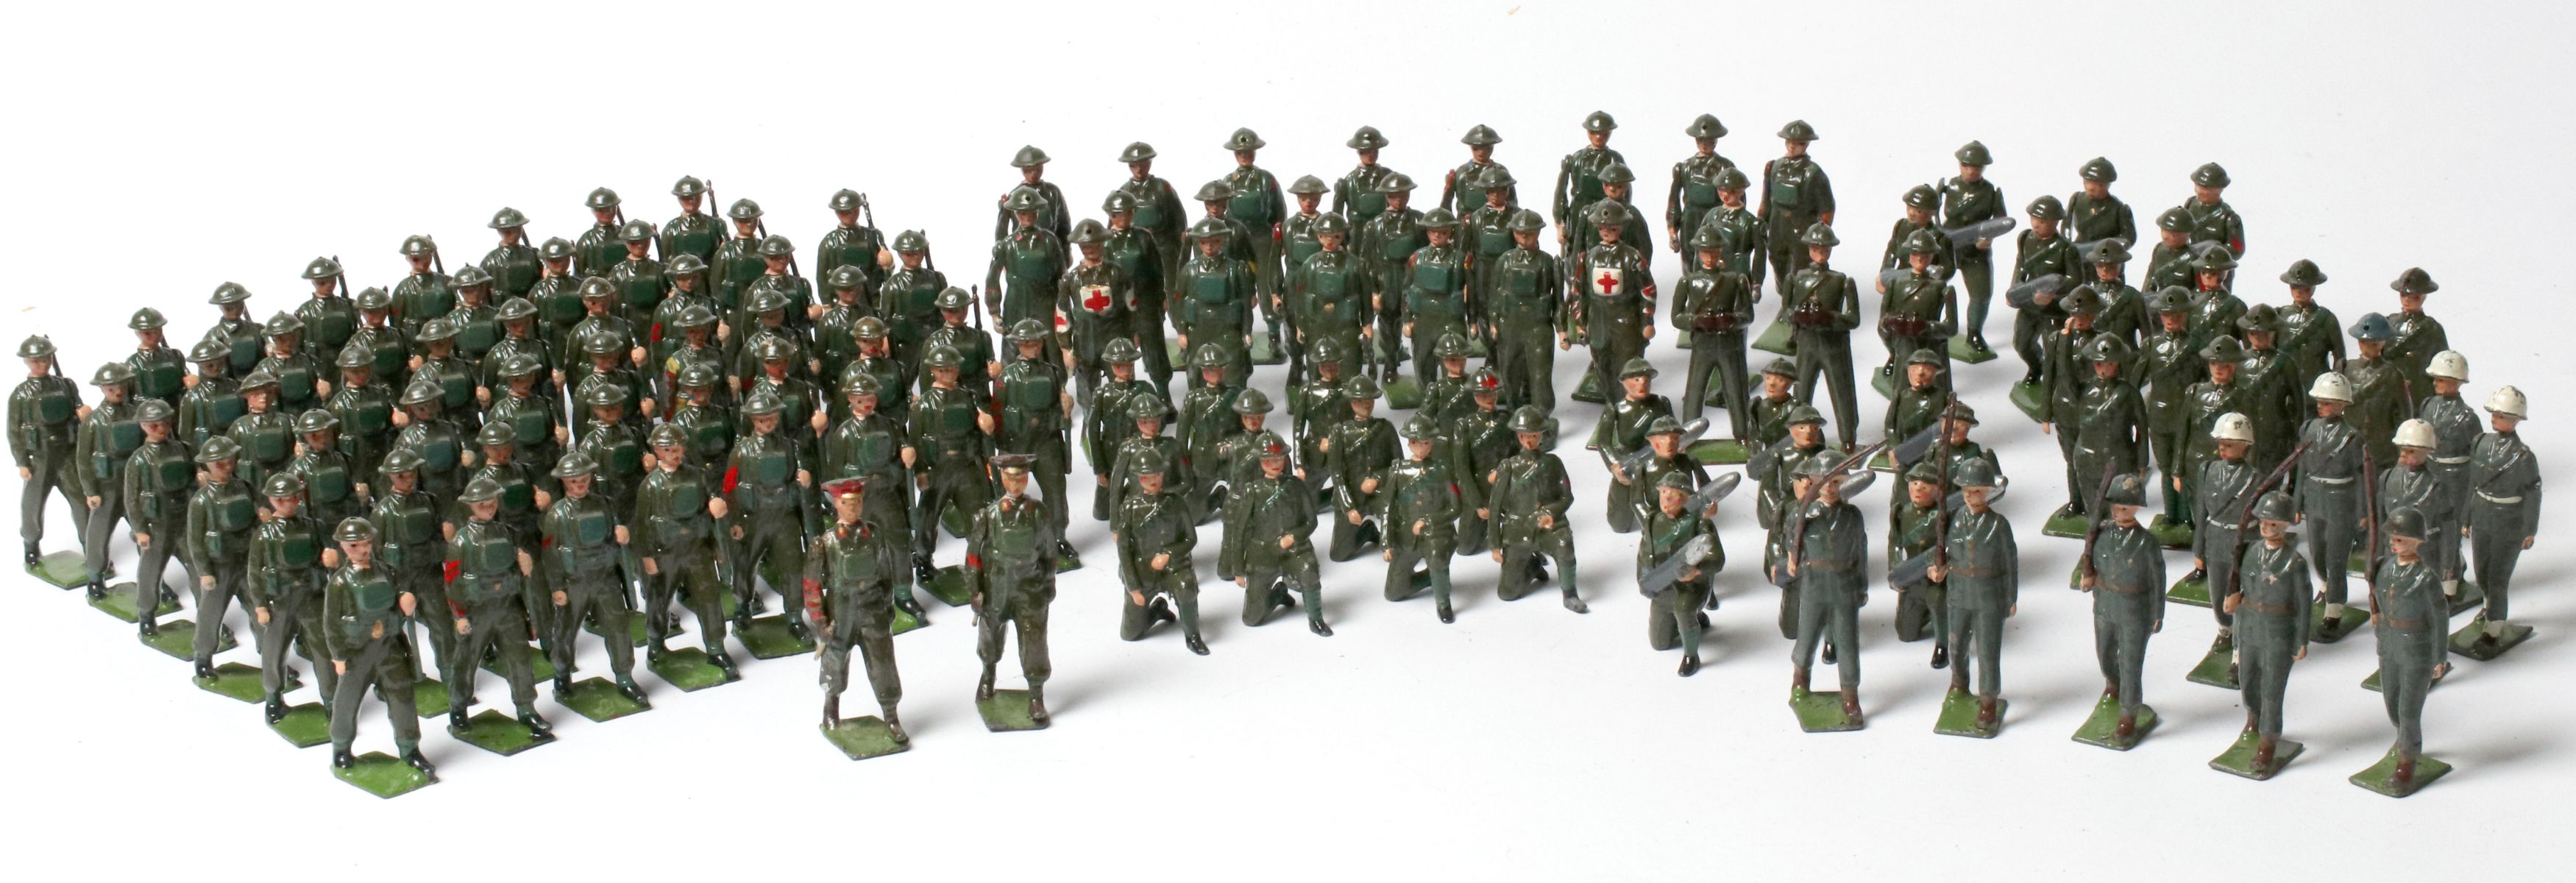 A COLLECTION OF 120 UN-BOXED BRITAINS WWI SOLDIERS